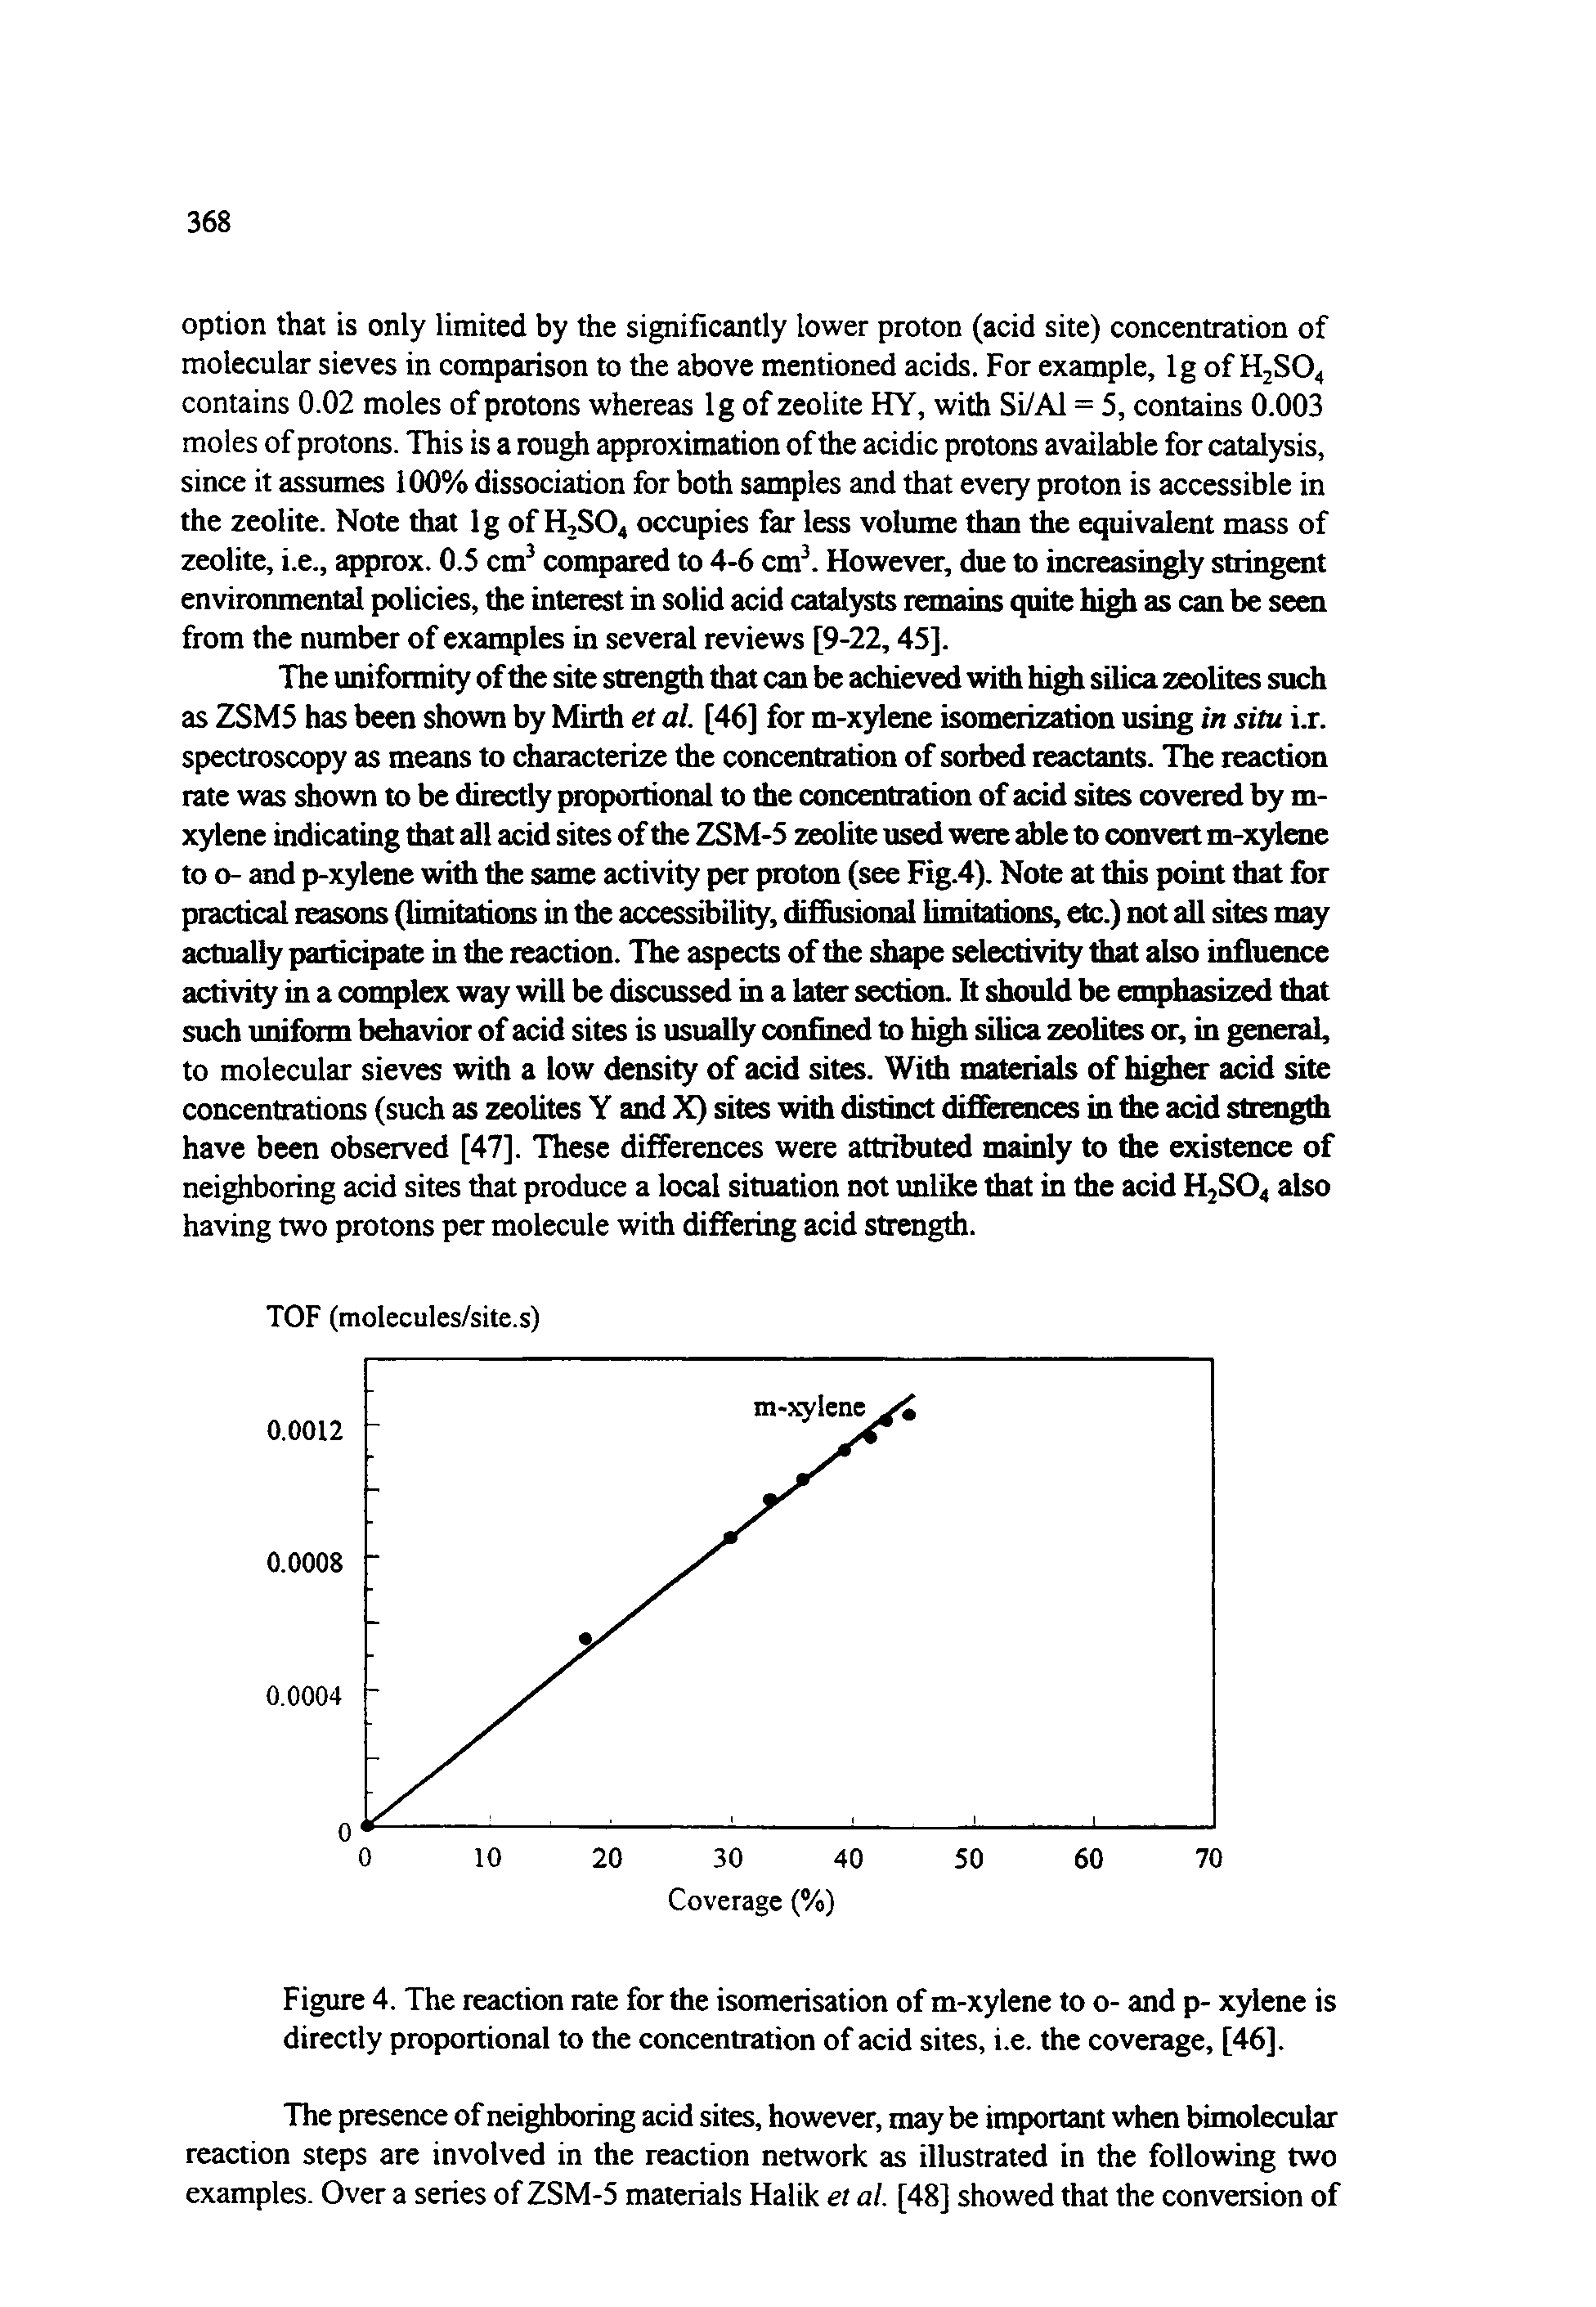 Figure 4. The reaction rate for the isomerisation of m-xylene to o- and p- xylene is directly proportional to the concentration of acid sites, i.e. the coverage, [46].